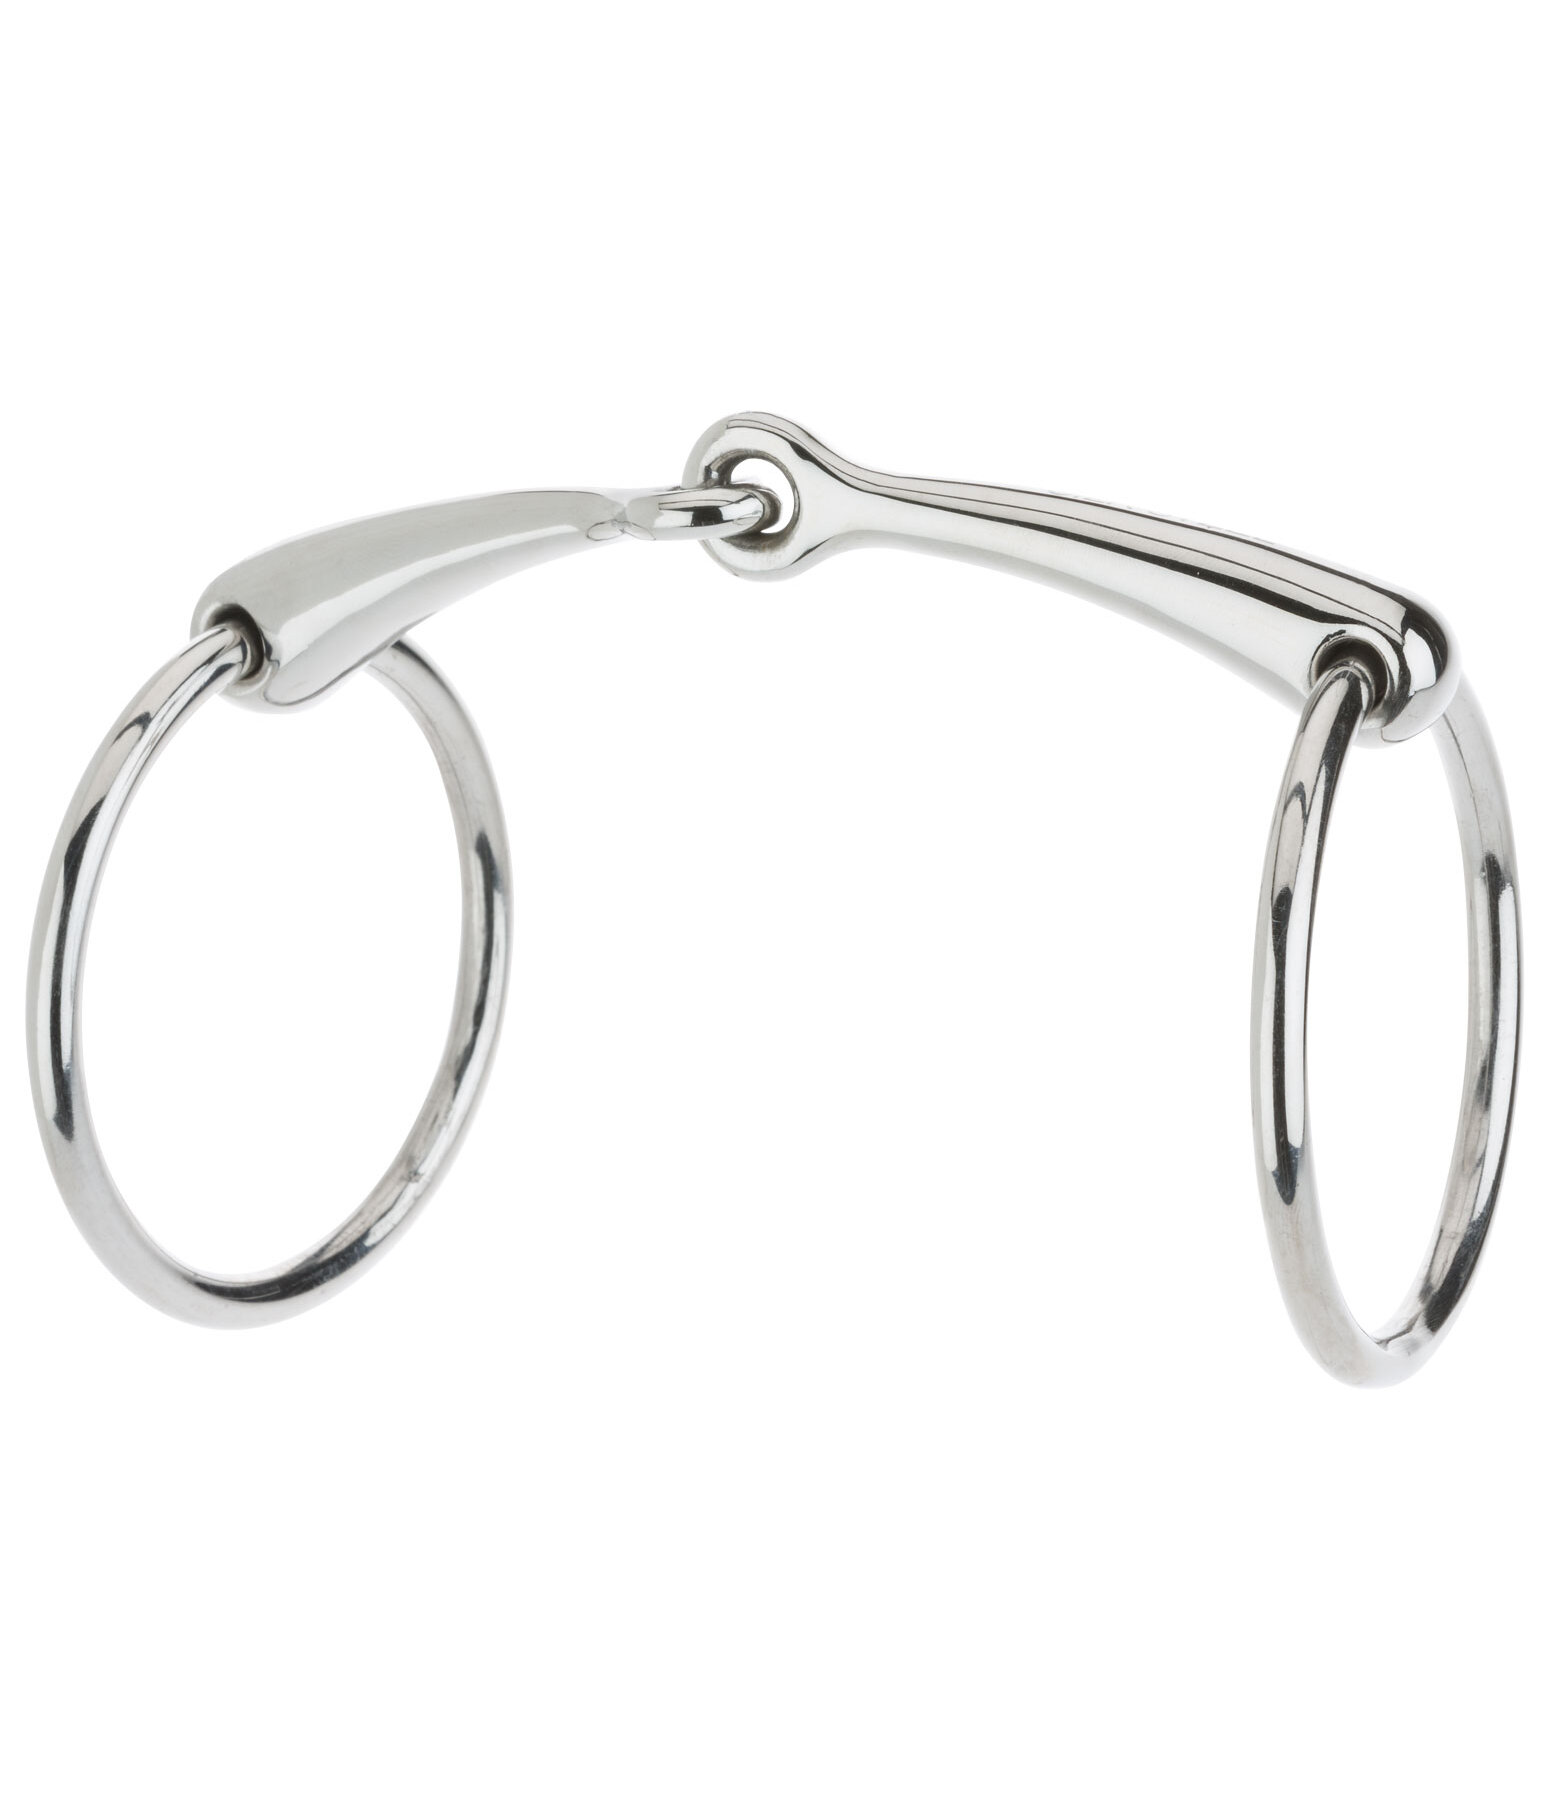 Loose Ring Snaffle Bit THIN Single  Jointed